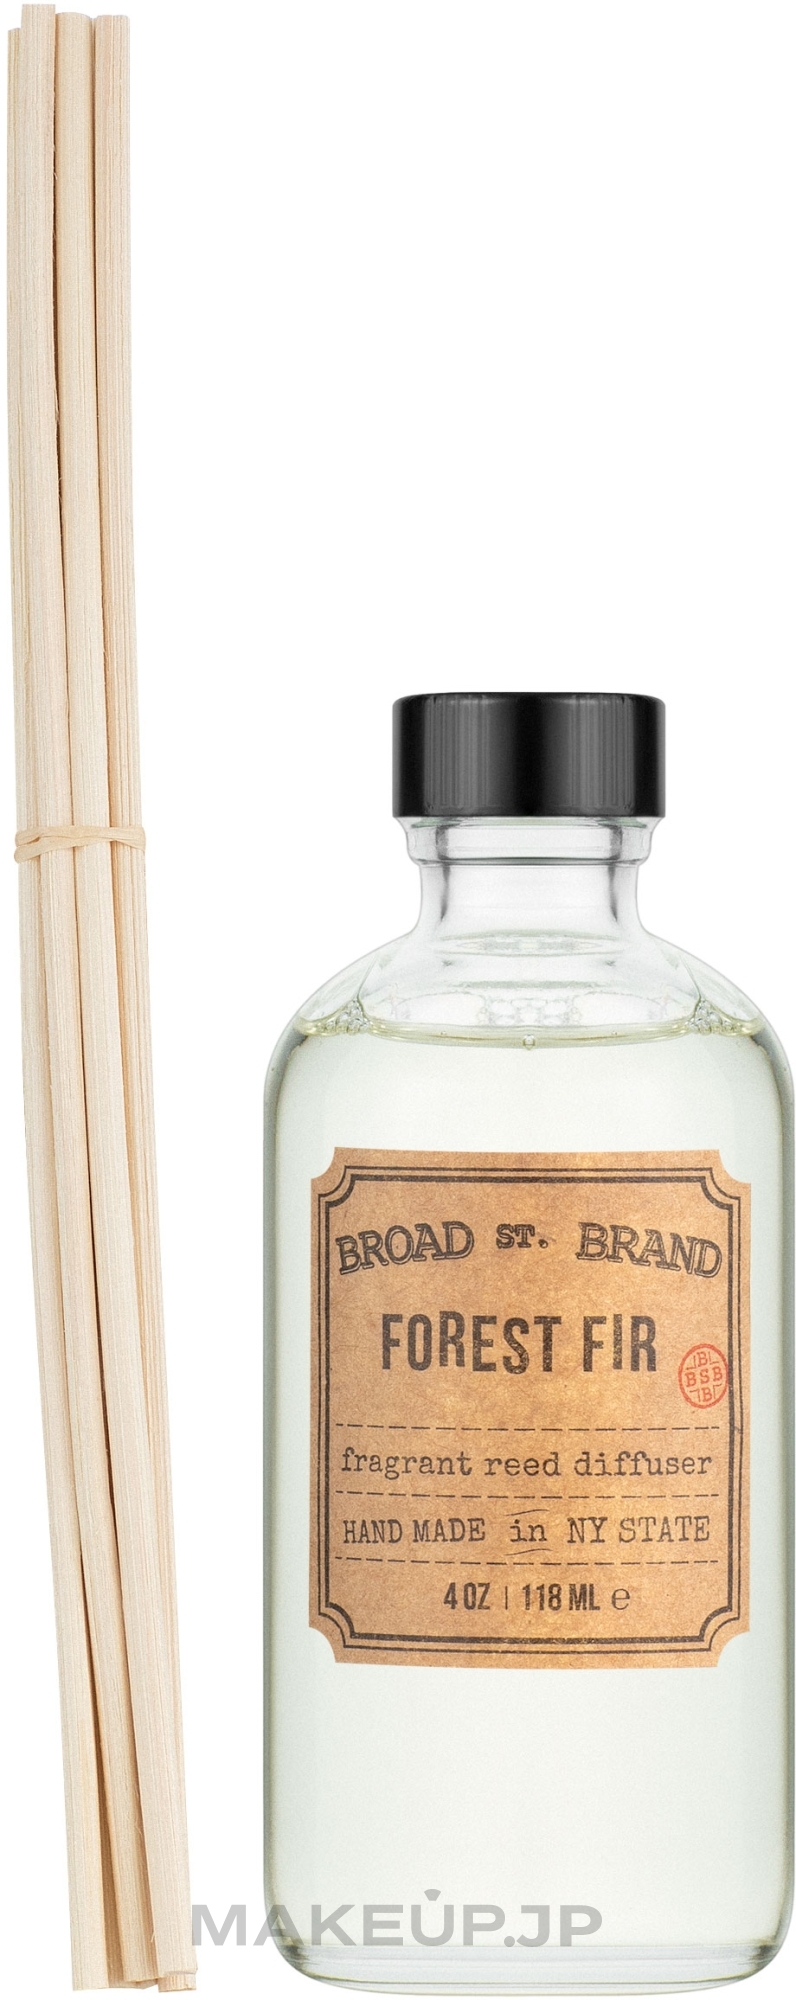 Kobo Broad St. Brand Forest Fir - Reed Diffuser — photo 118 ml